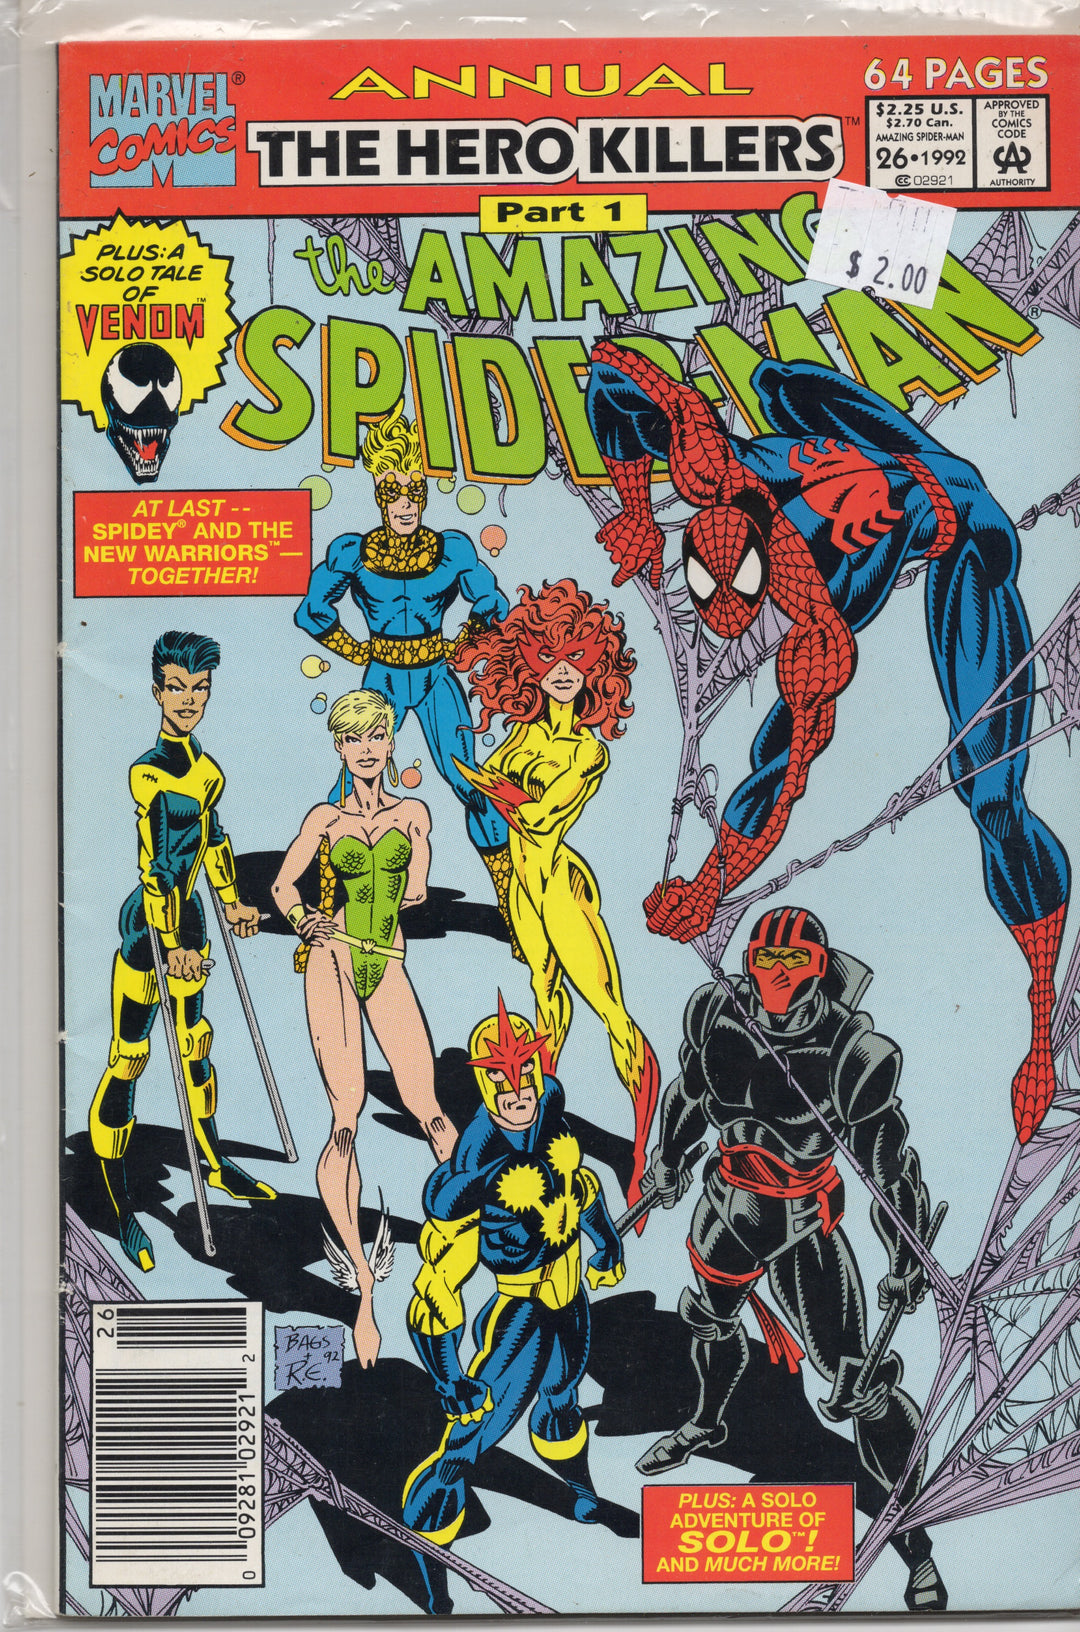 The Amazing Spider Man Annual #26